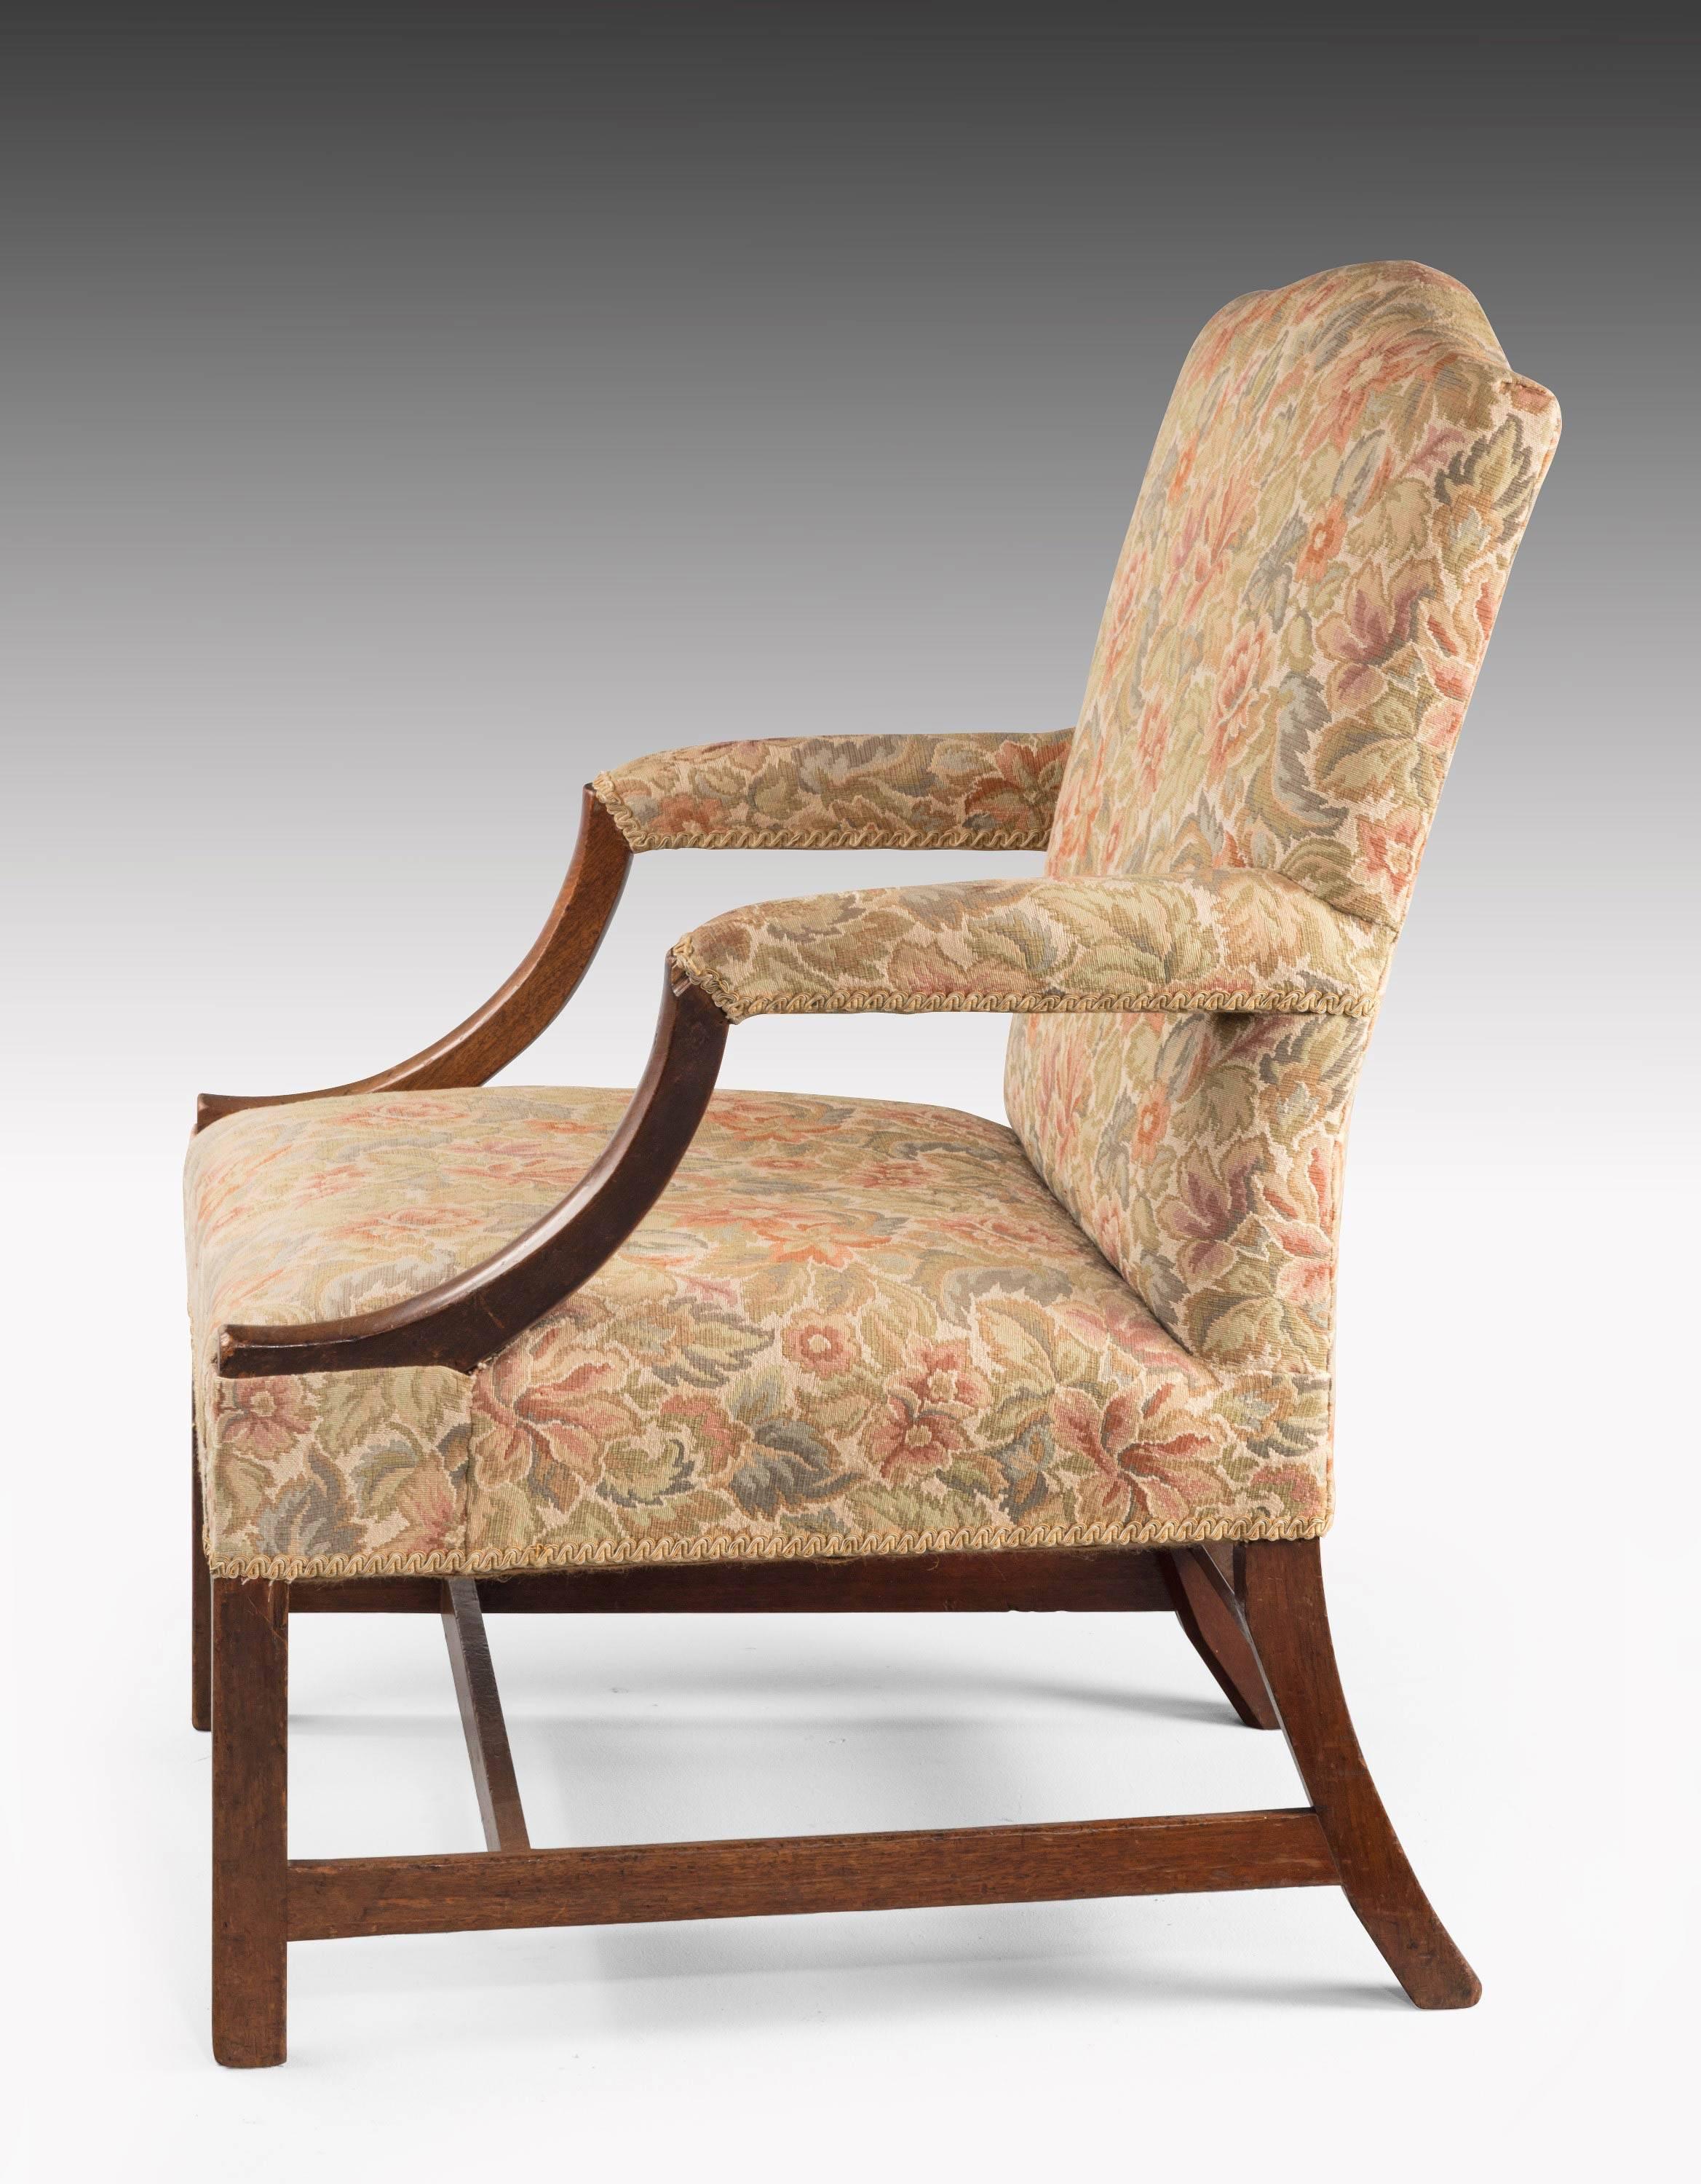 English George III Period Mahogany Gainsborough Armchair with Strong Square Supports